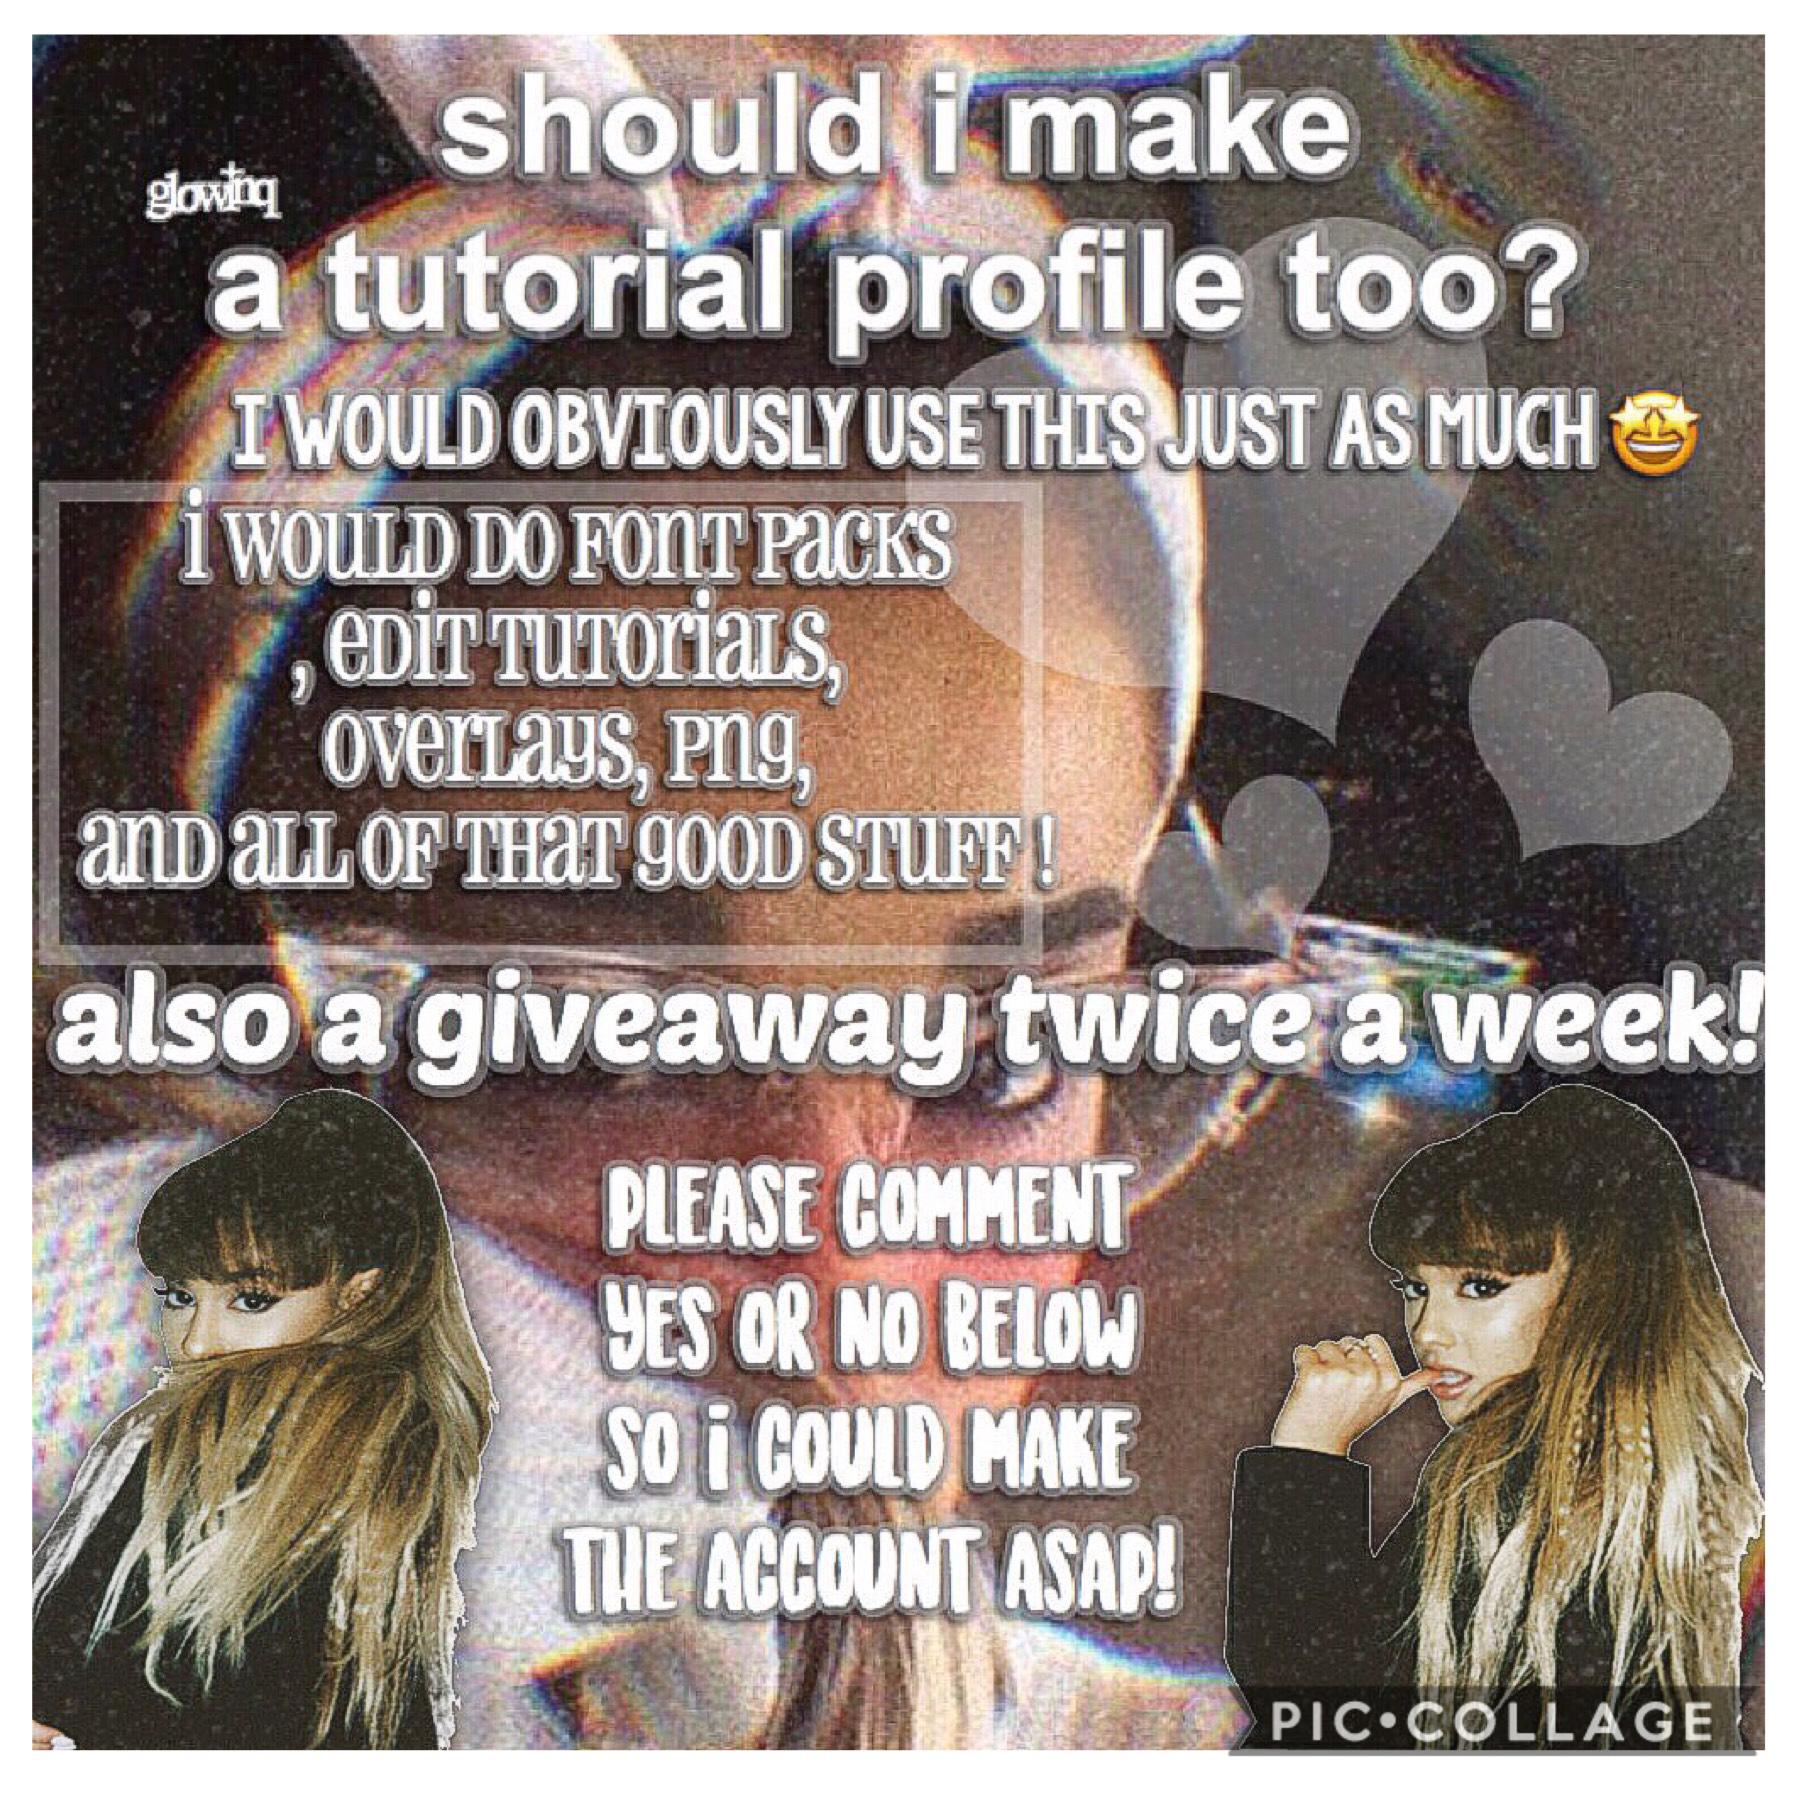 i want to do it when i reach 60 followers and if i get yes comments !! 🤩💘